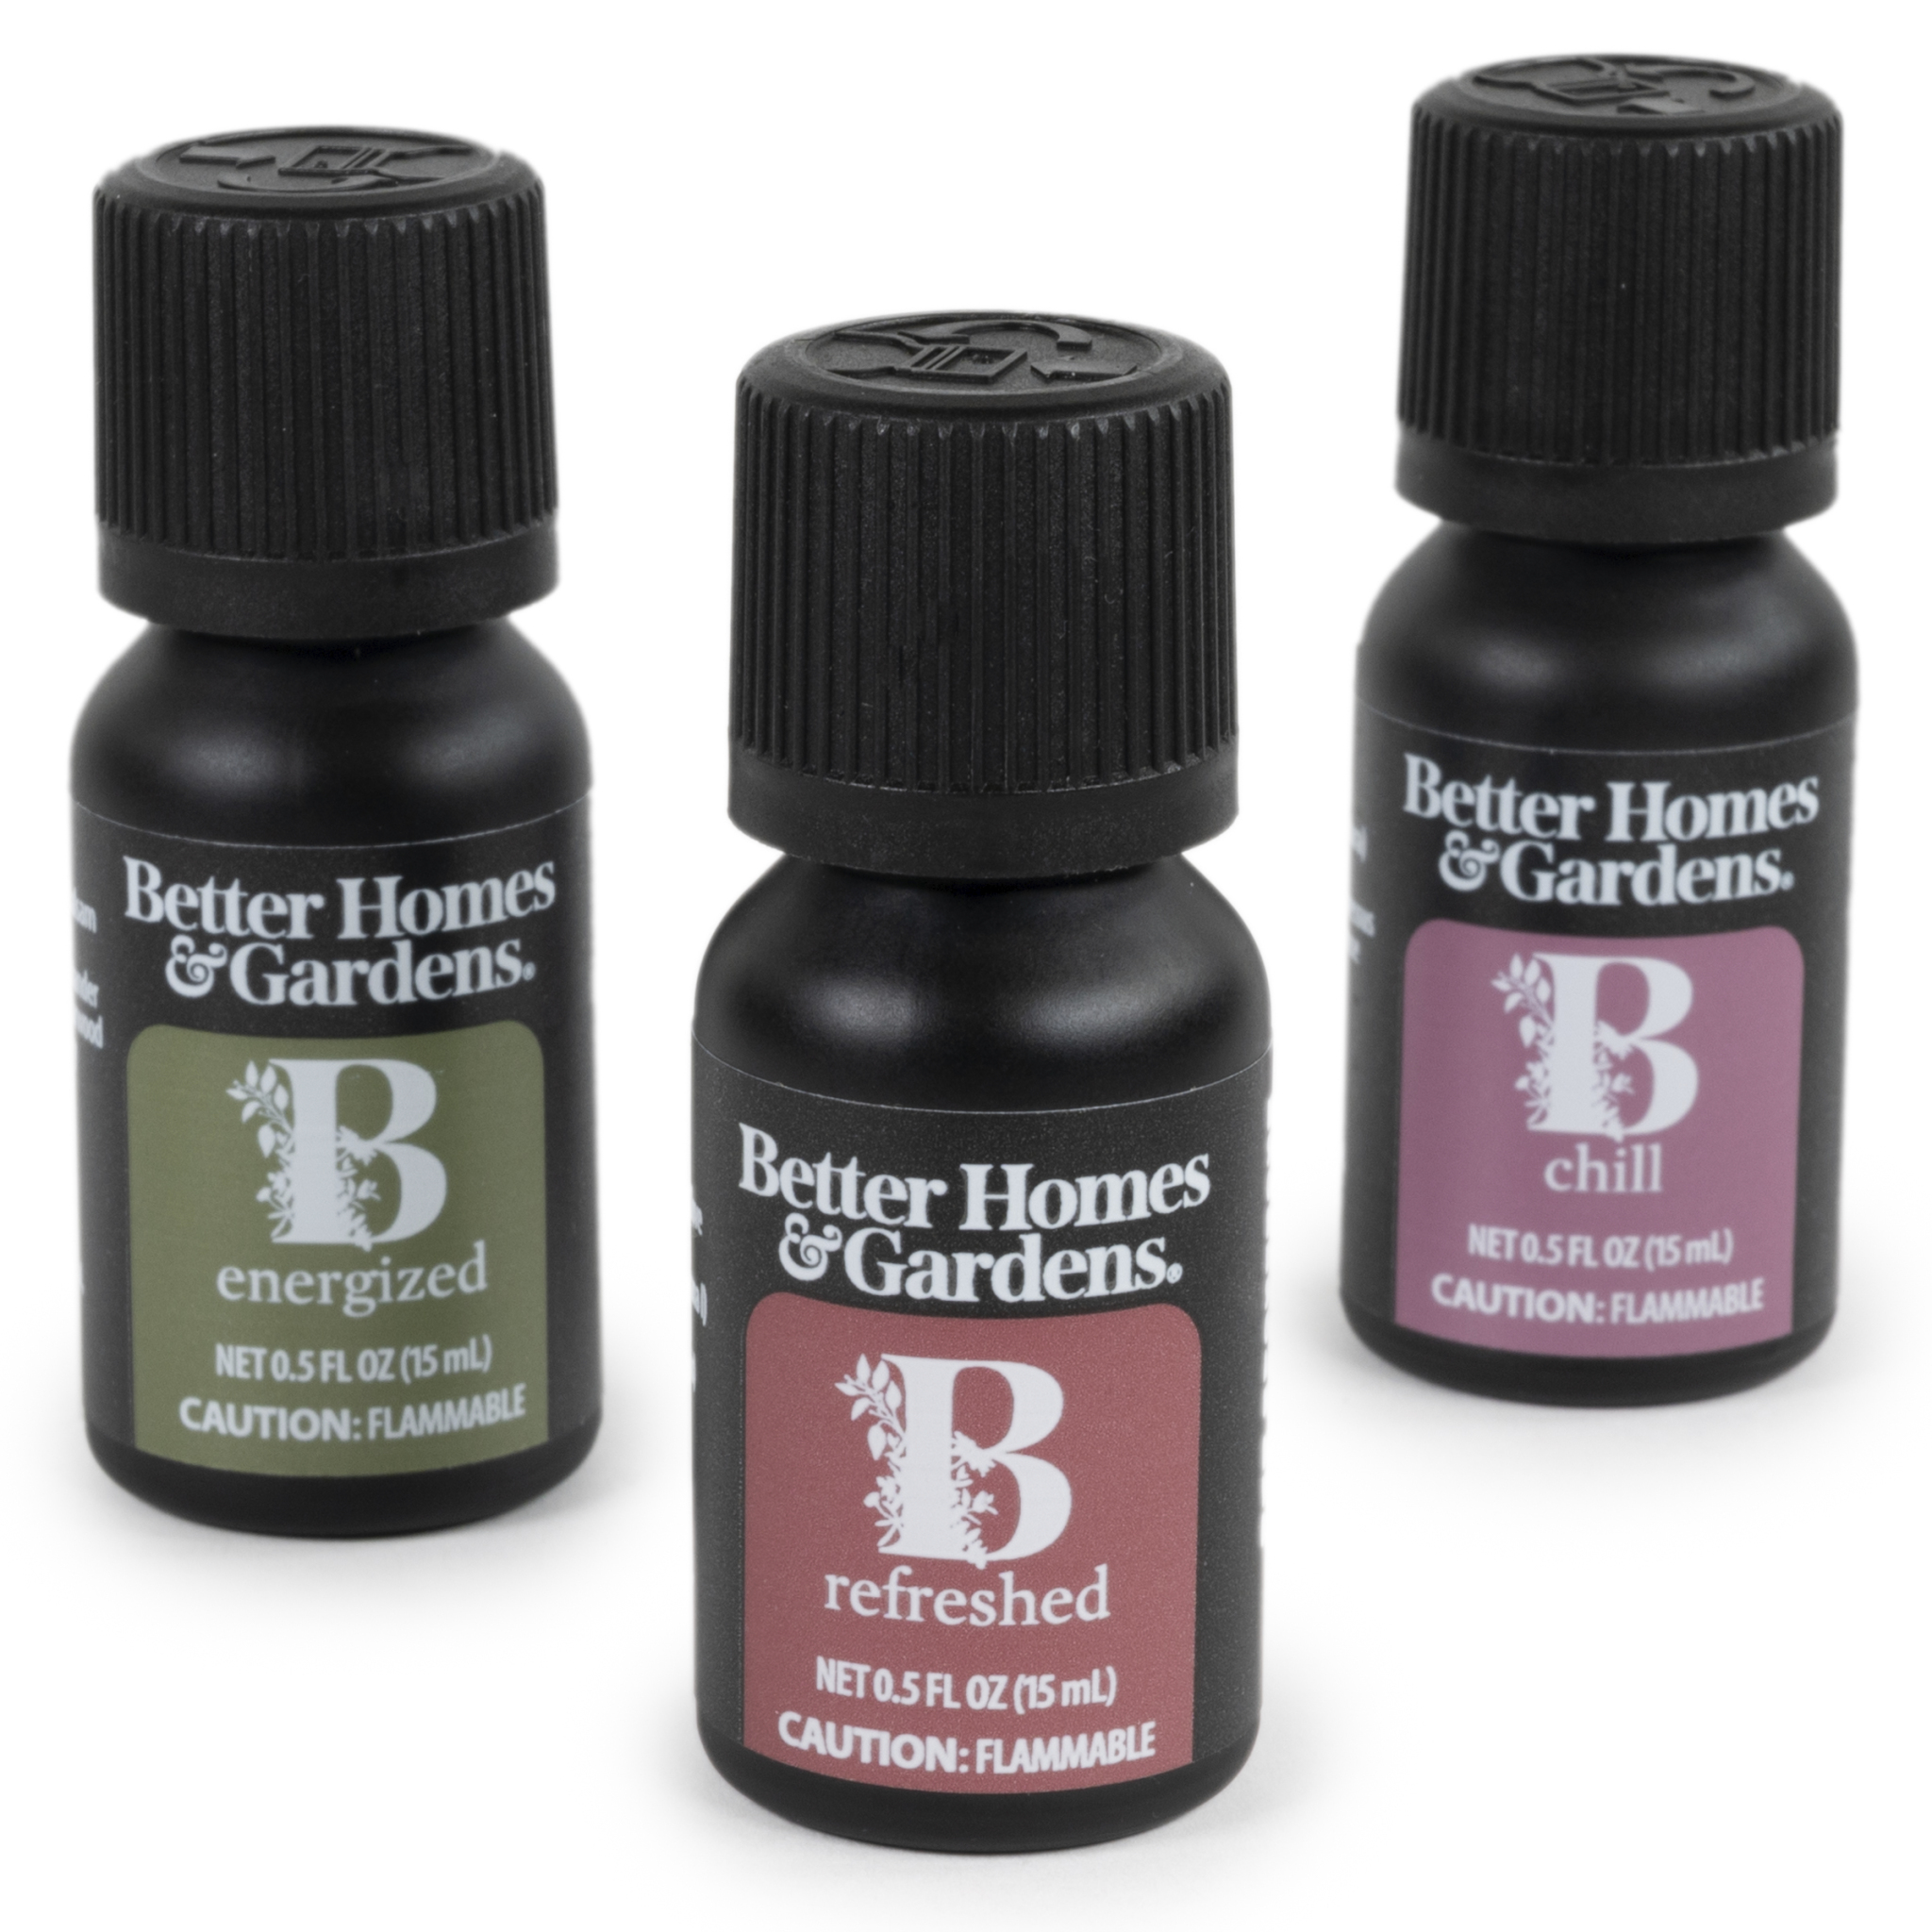 Better Homes & Gardens 100% Pure Essential Oils: Energized, Restored, &  Chill, 3 Pack x 15mL